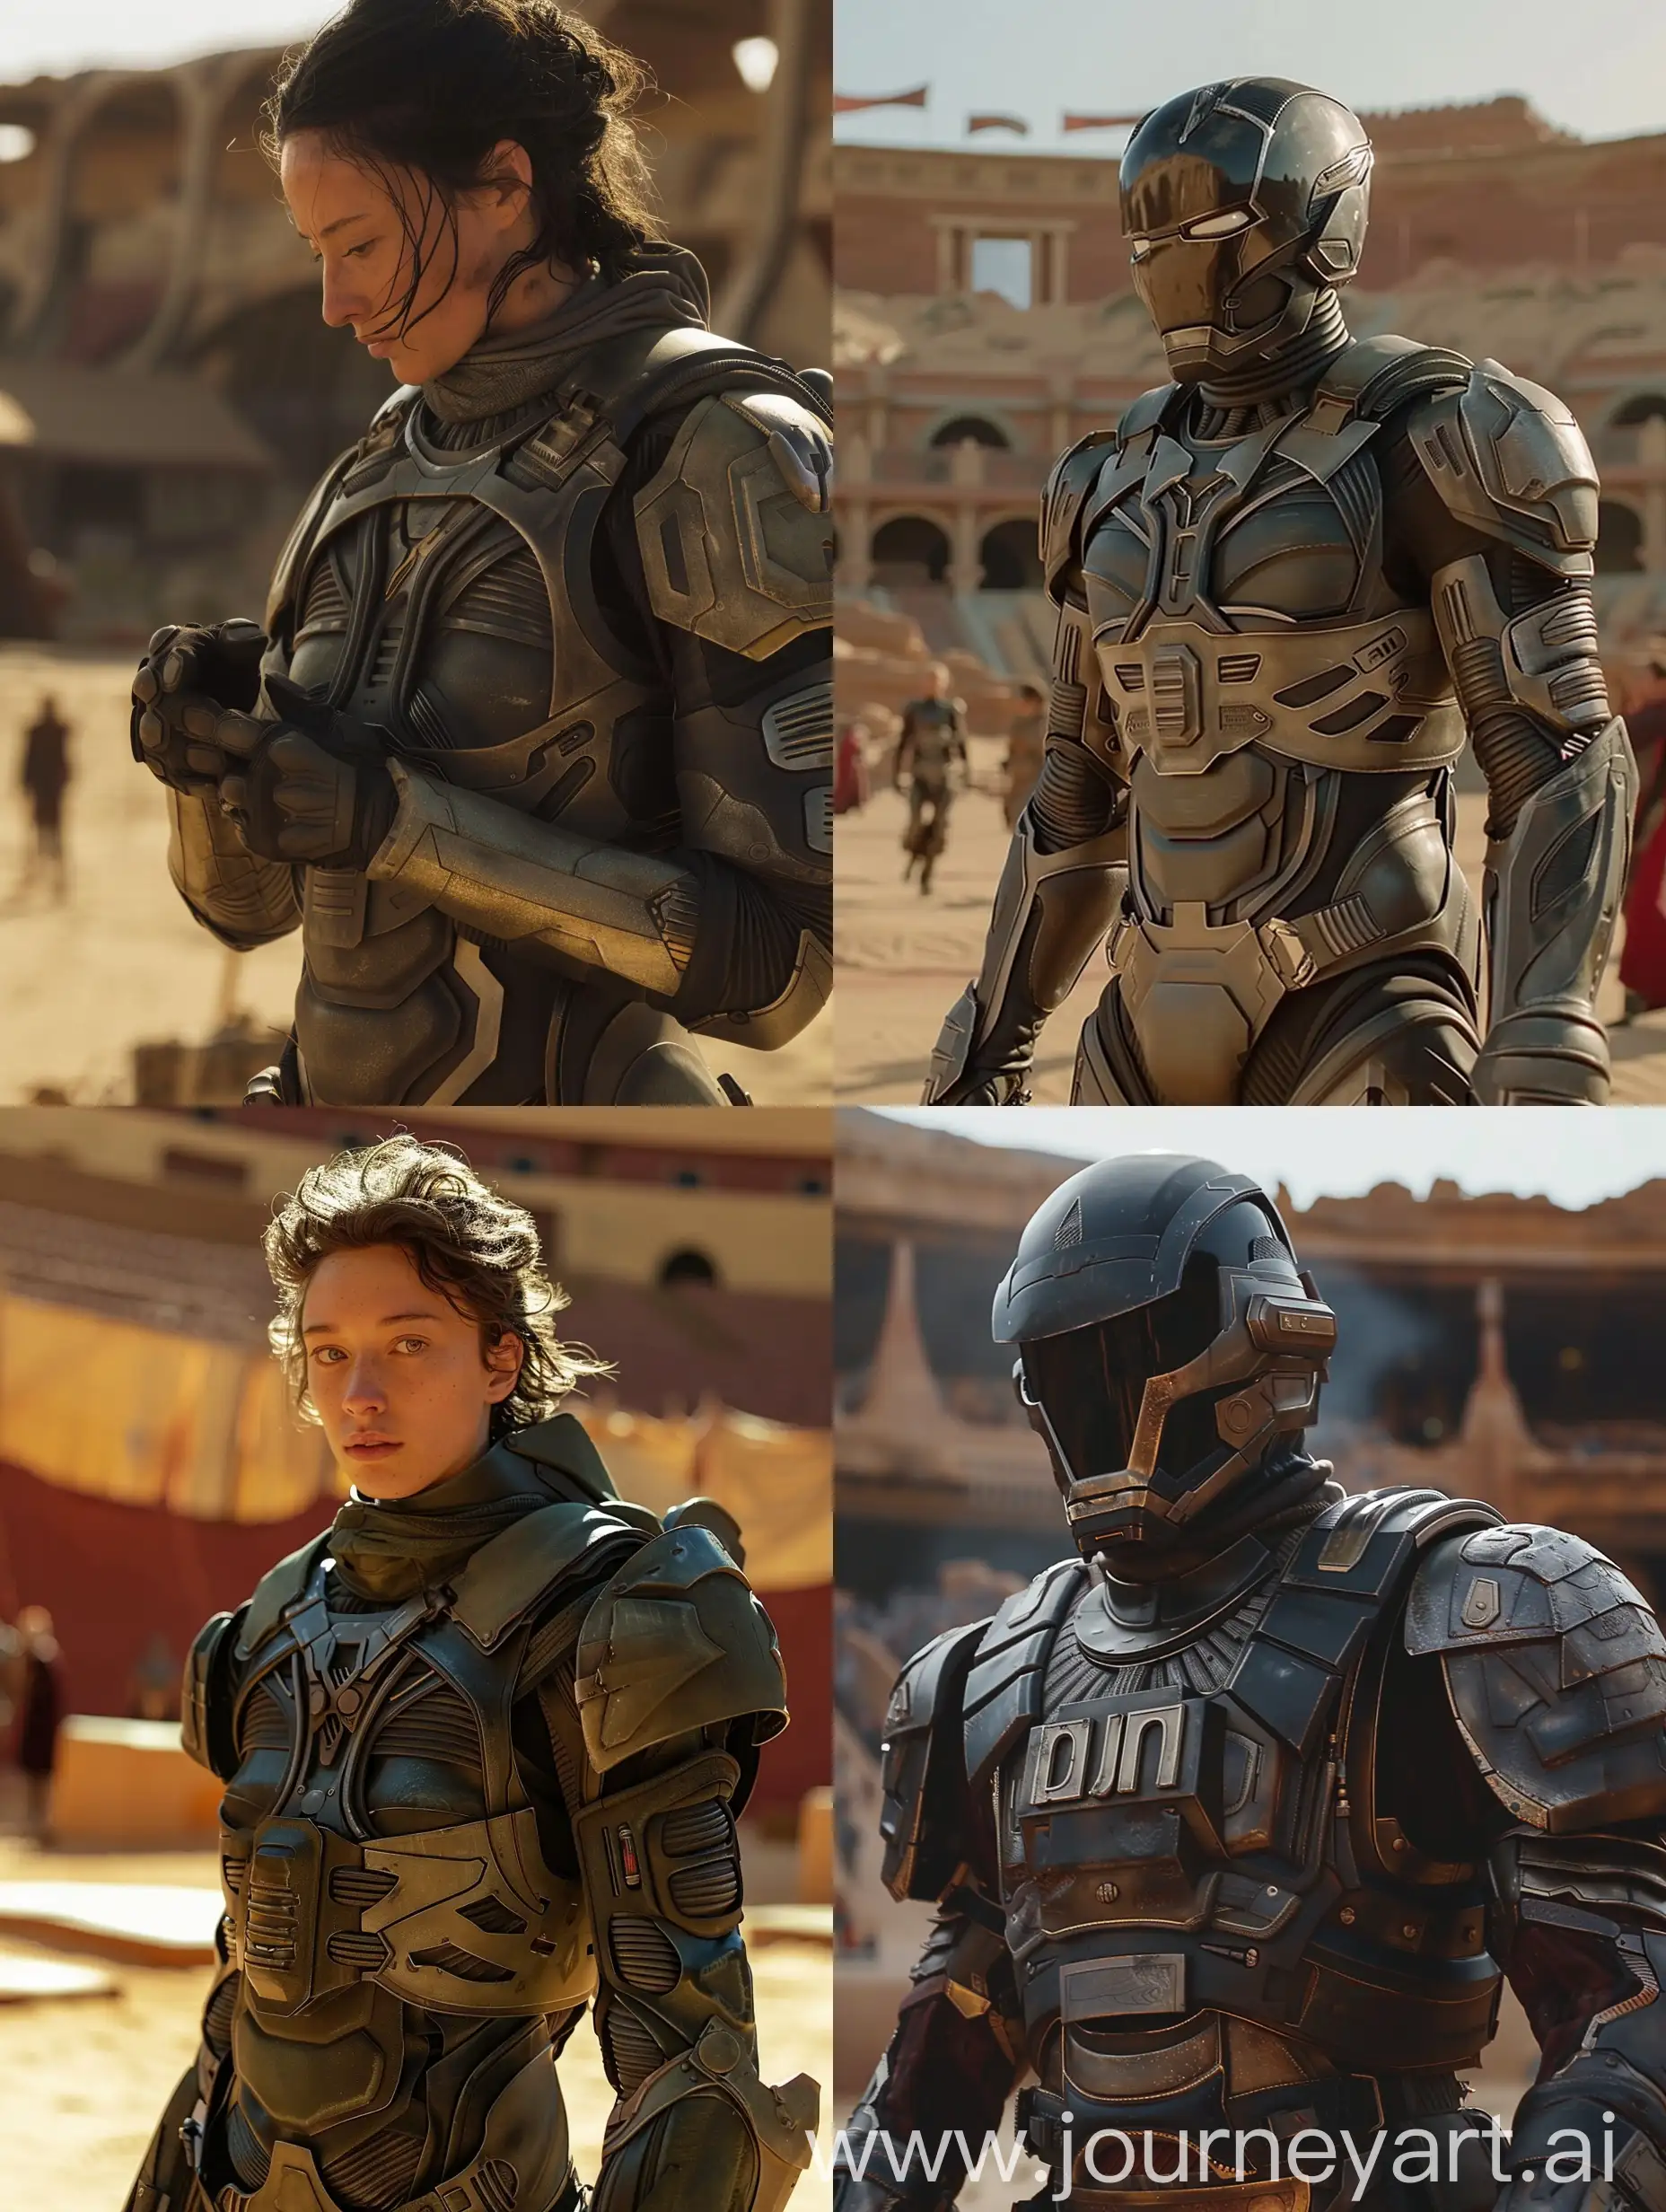 Iron man a close up of a person in a costume, film still from movie dune-2021, still from movie dune, in an arena in movie dune-2021, desert breathing armor, in the 2 0 2 1 movie dune, scene from dune 2 0 2 1 movie, dune (2021)